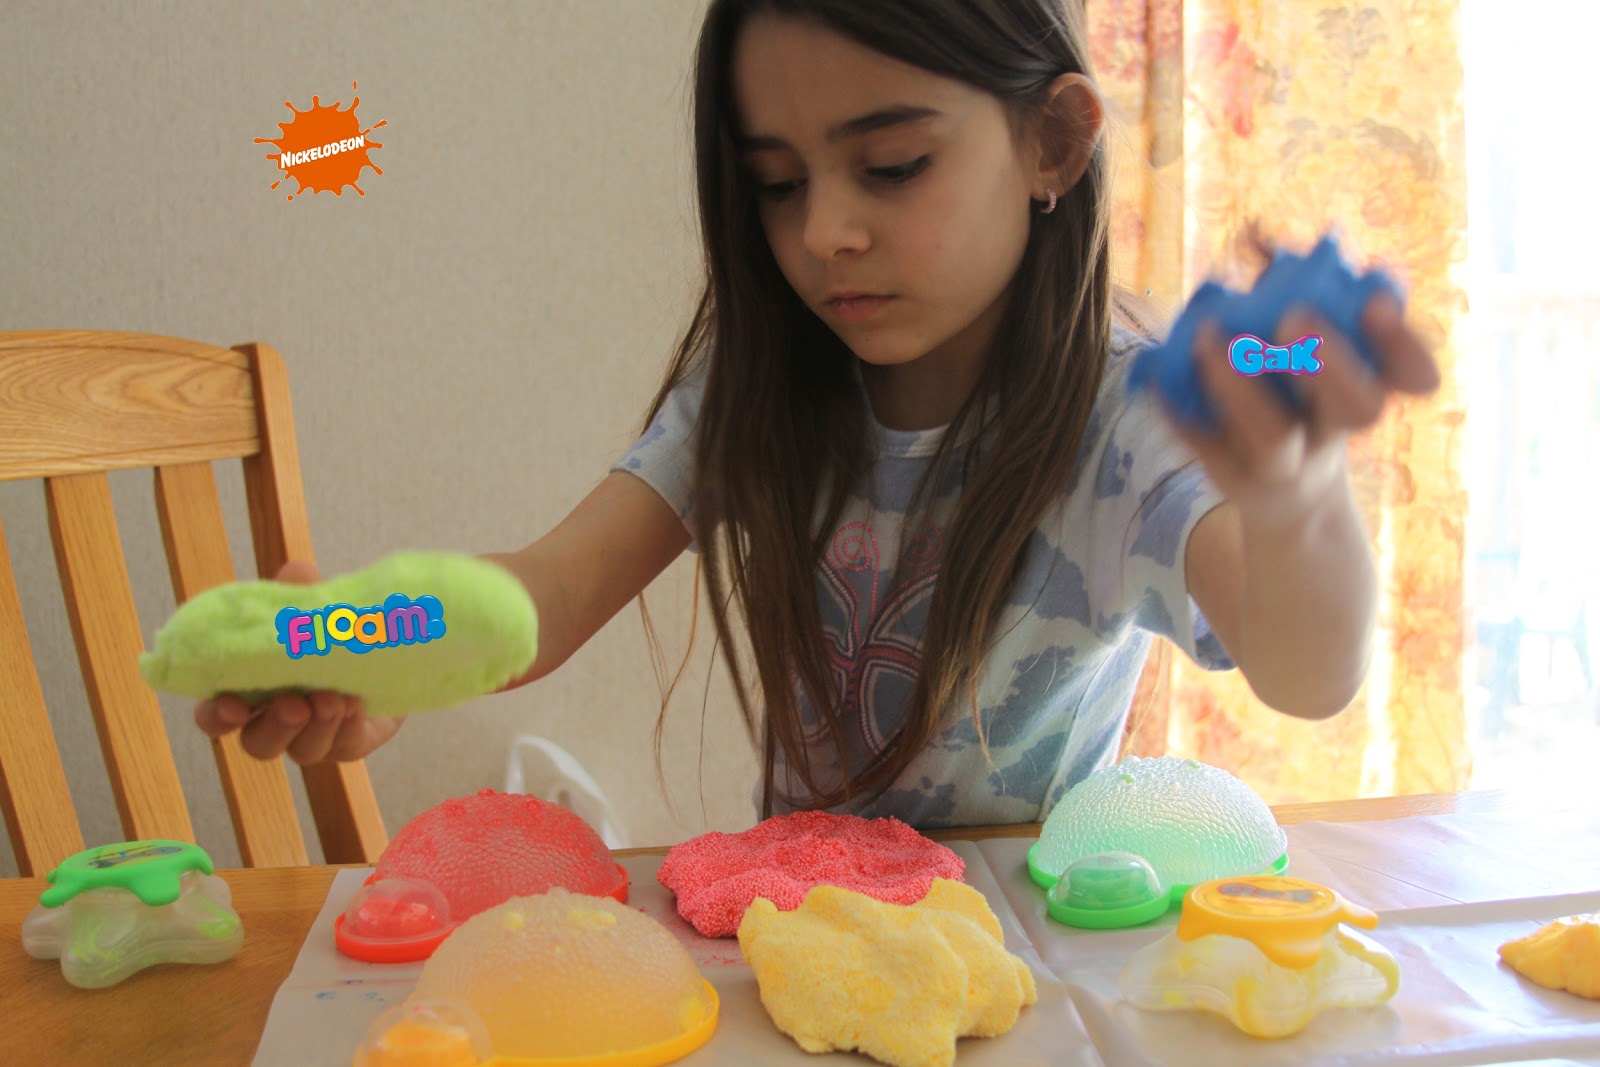 Nickelodeon Floam is Back and as much fun as ever!! {Review} - 2 Boys + 1  Girl = One Crazy Mom